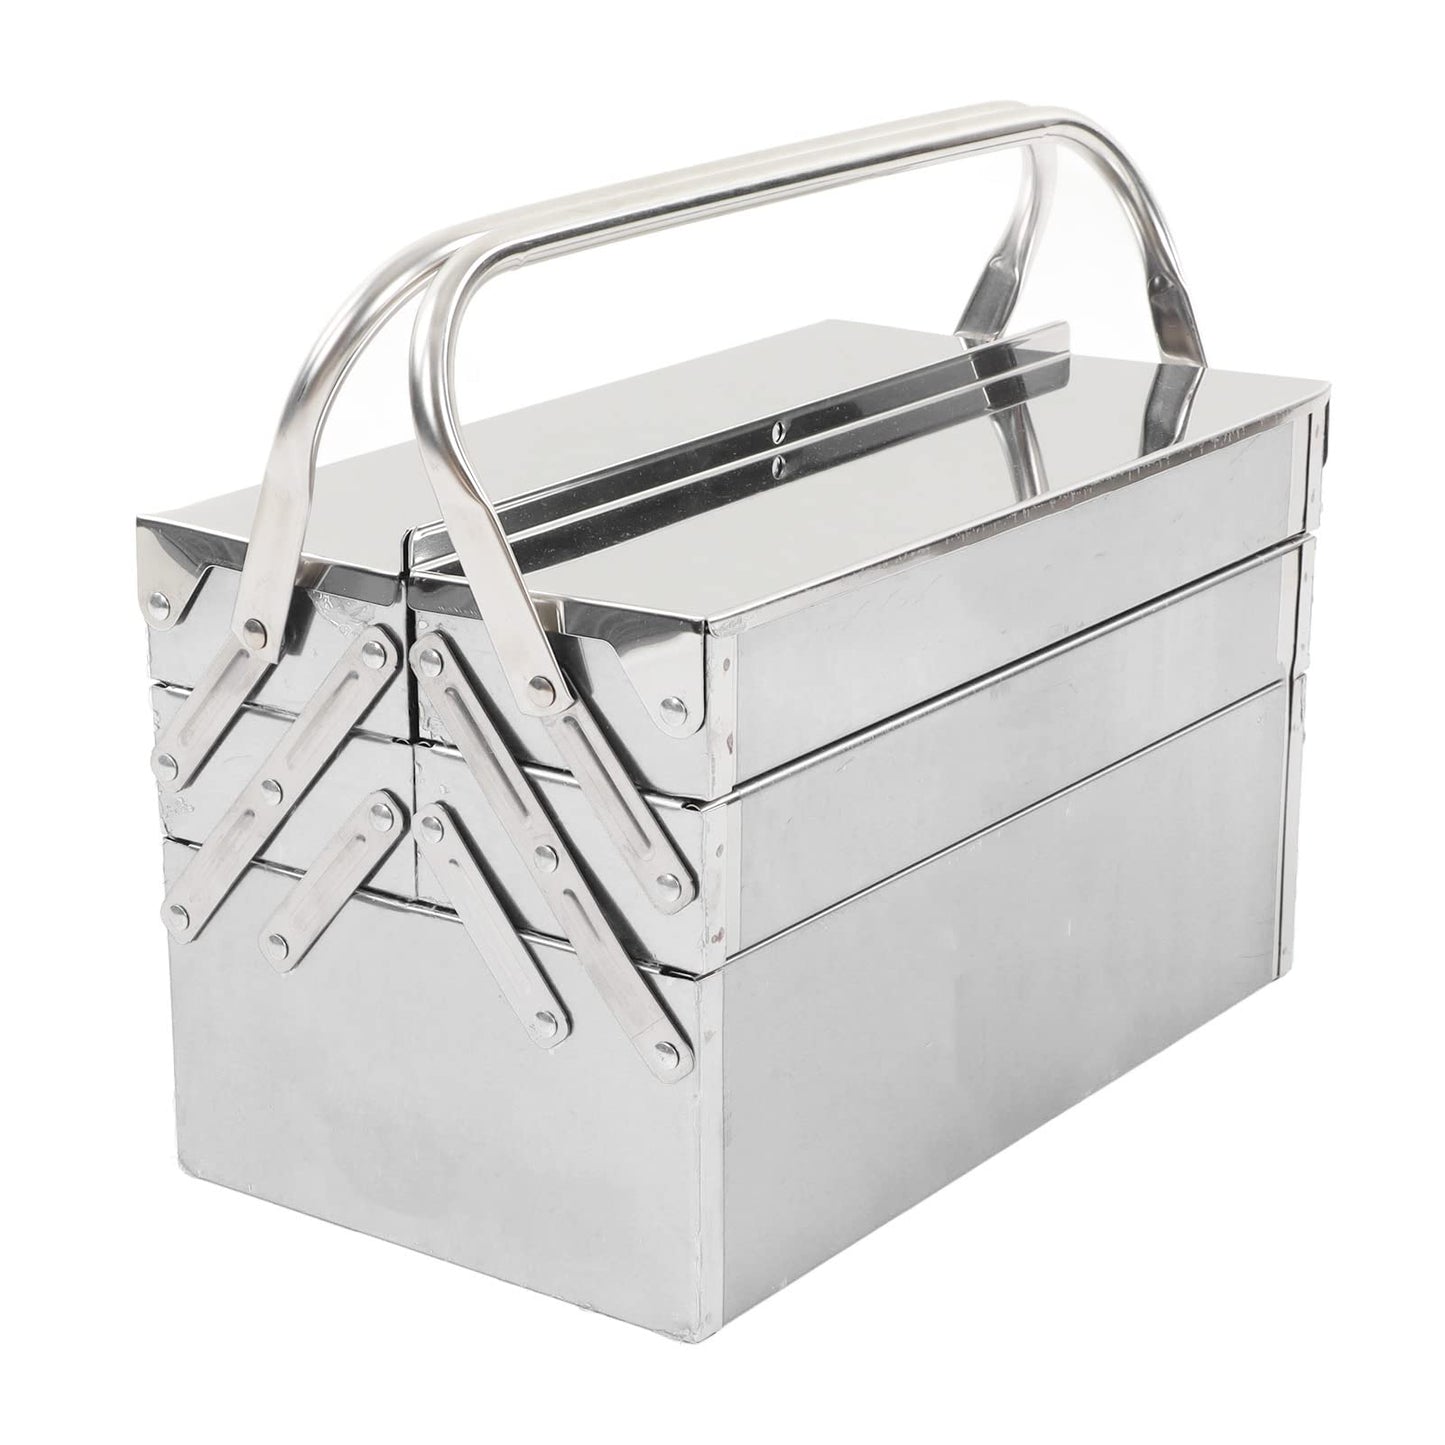 Portable Cantilever Tool Box Crafted from Stainless Steel with 5 Tray Cantilever for Home and Auto Repair Folding Metal Toolbox. (460)